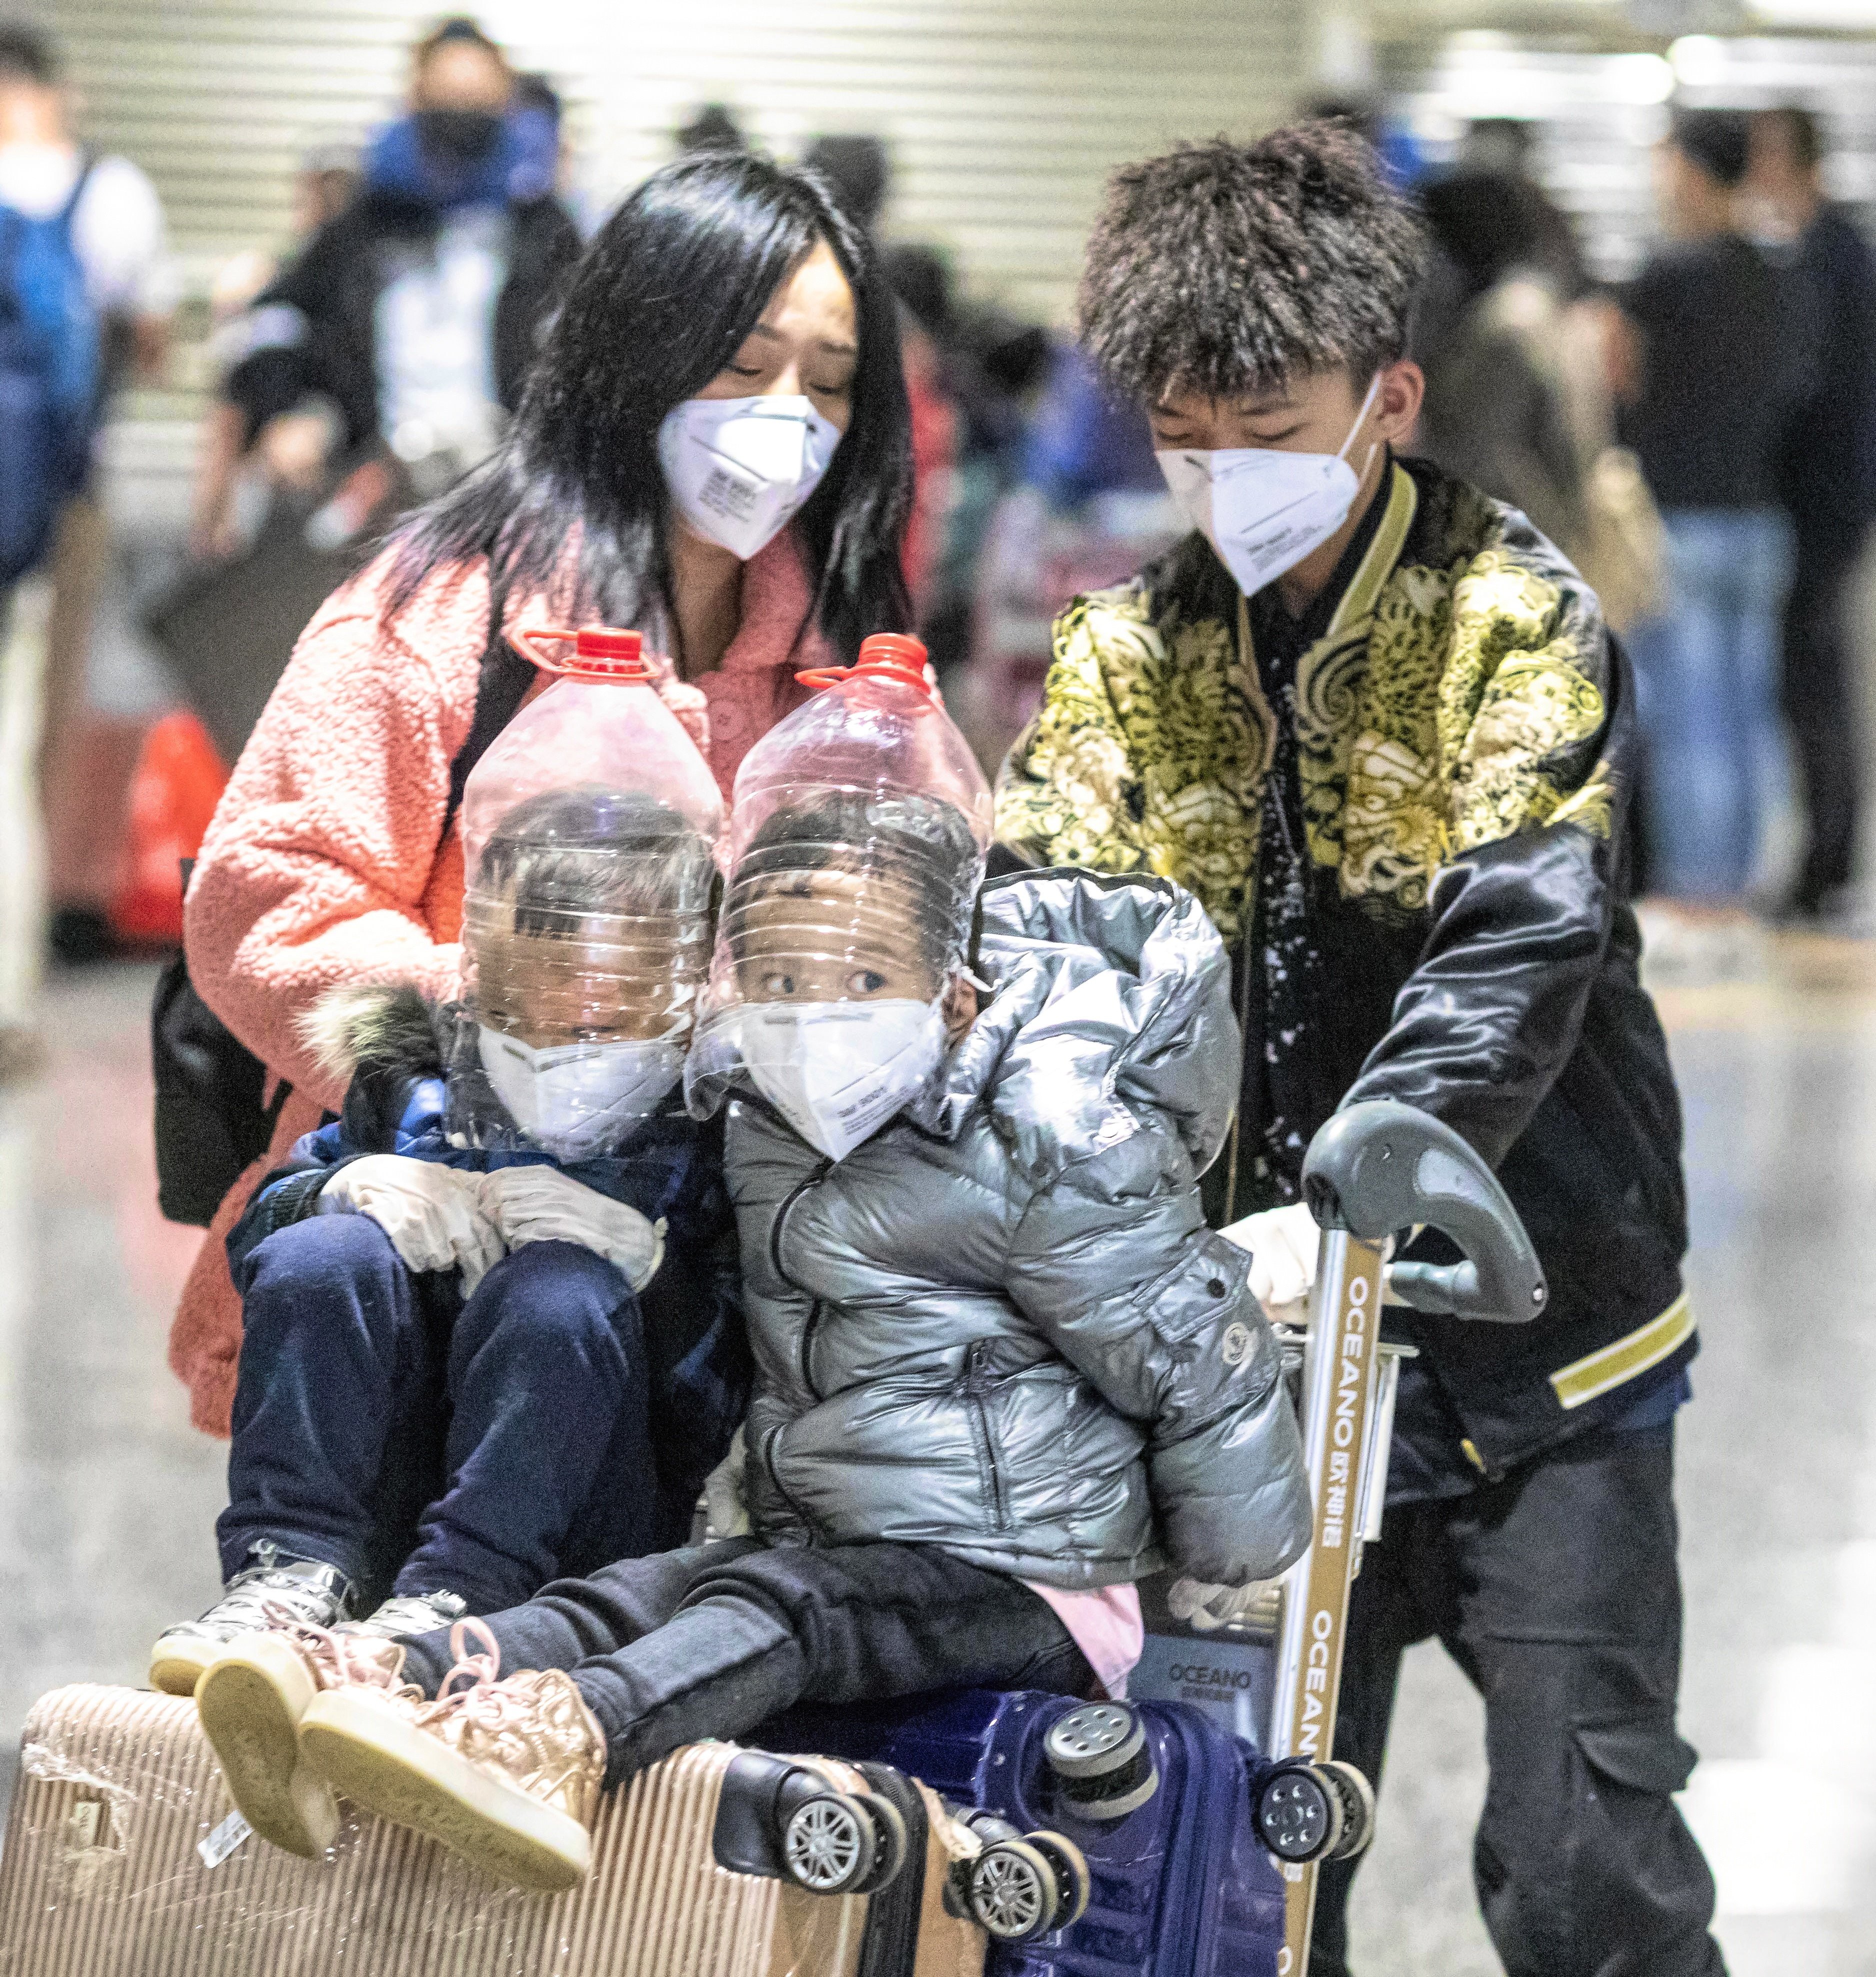 Children wear face protection improvised from water bottles at Guangzhou airport’s arrival terminal on February 1. Photo: EPA-EFE